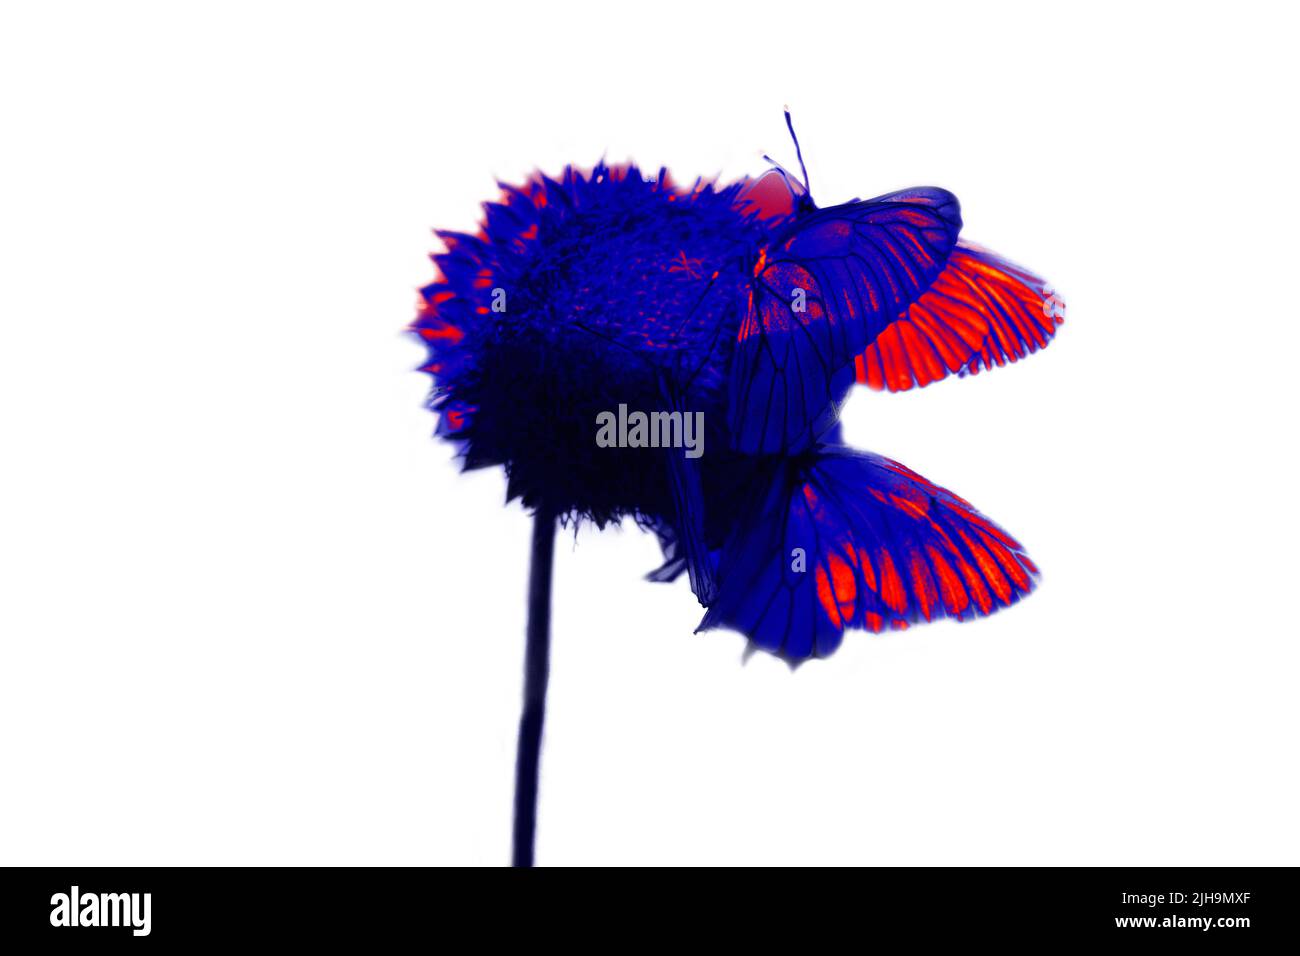 White butterflies on a spherical flower. Thermal Impressionism. Stock Photo